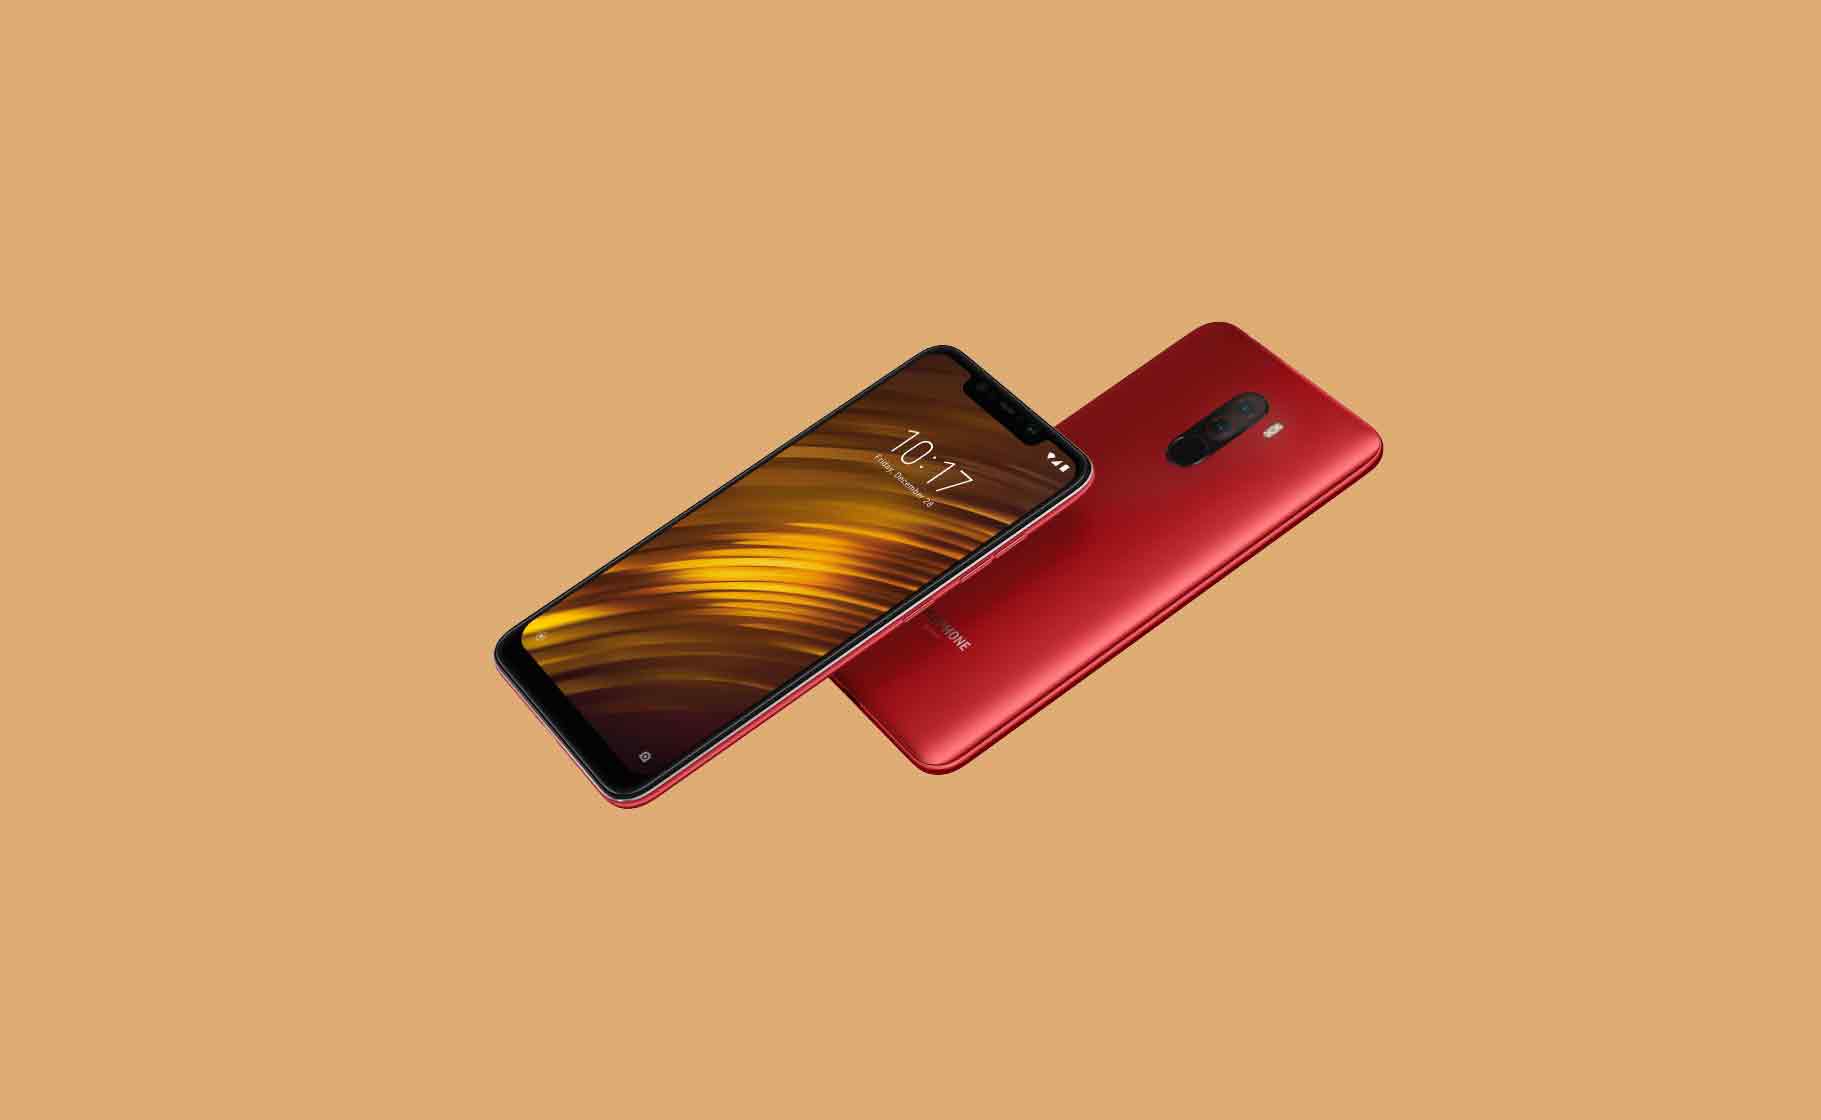 How to Enter Fastboot mode on Poco F1 (Xiaomi Pocophone)